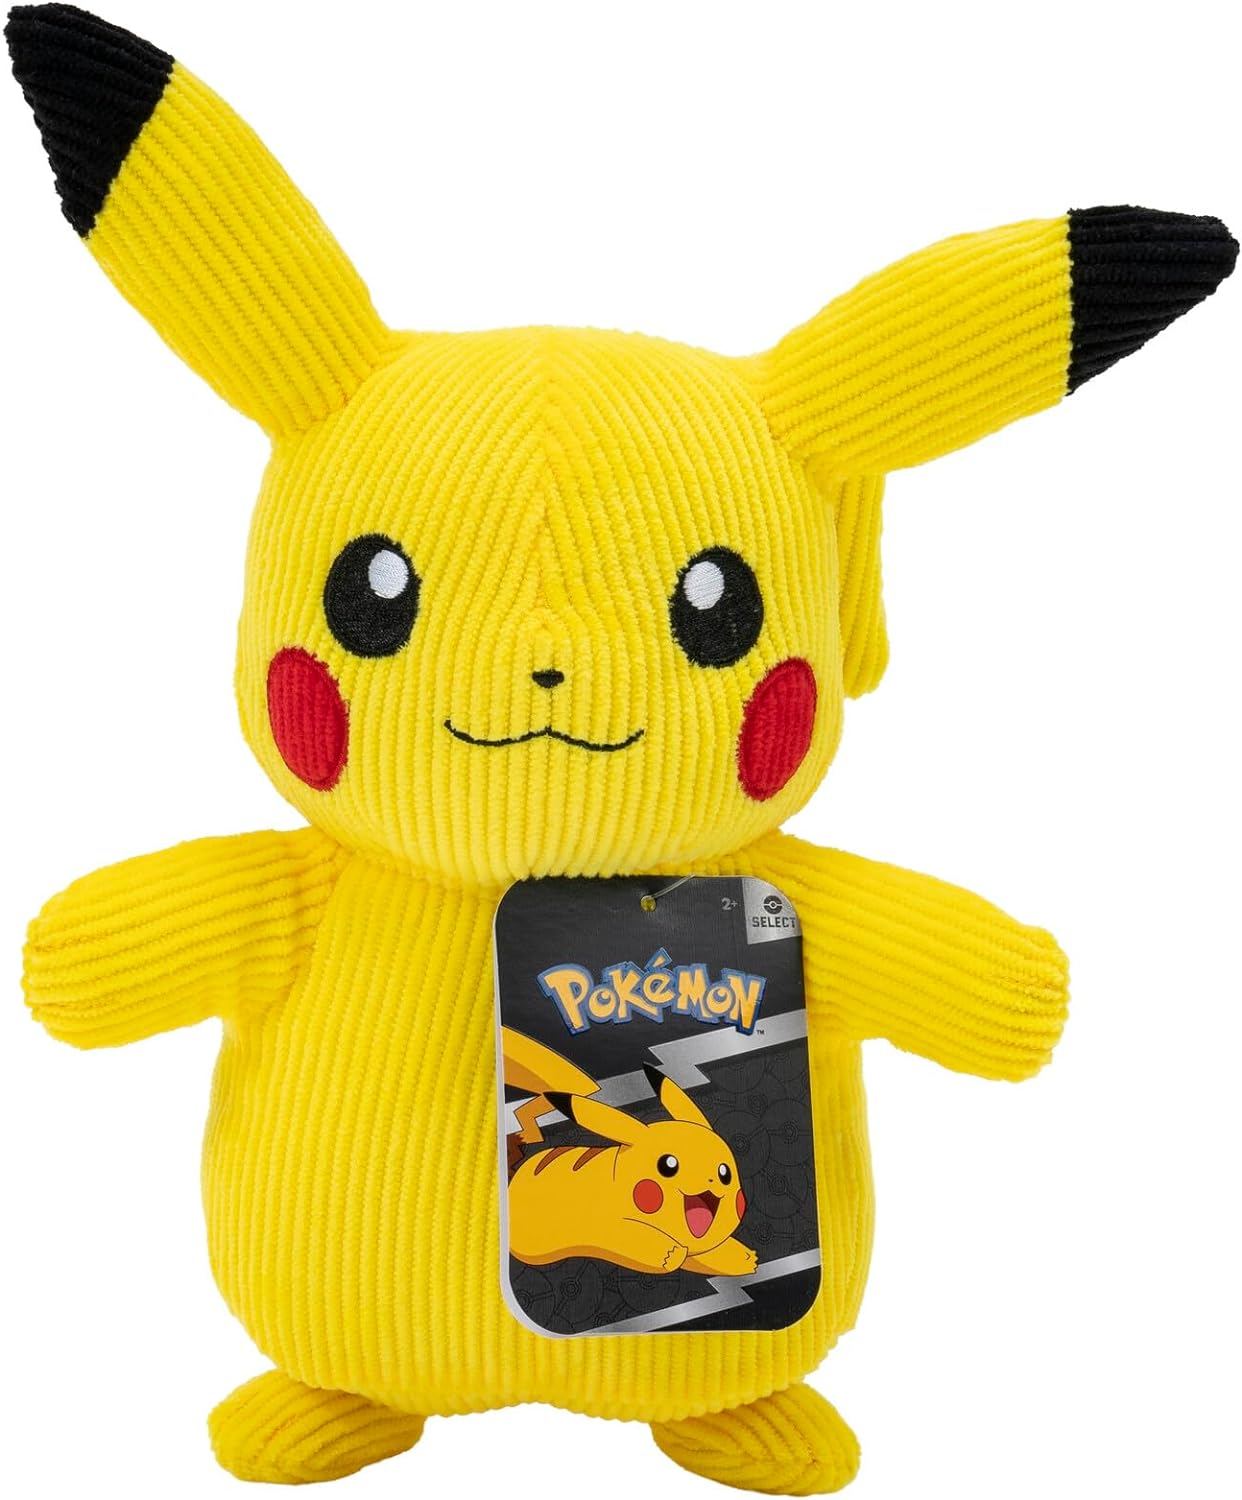 Pokemon Pikachu Select Corduroy 8" Plush - Officially Licensed and Stuffed Animal Material